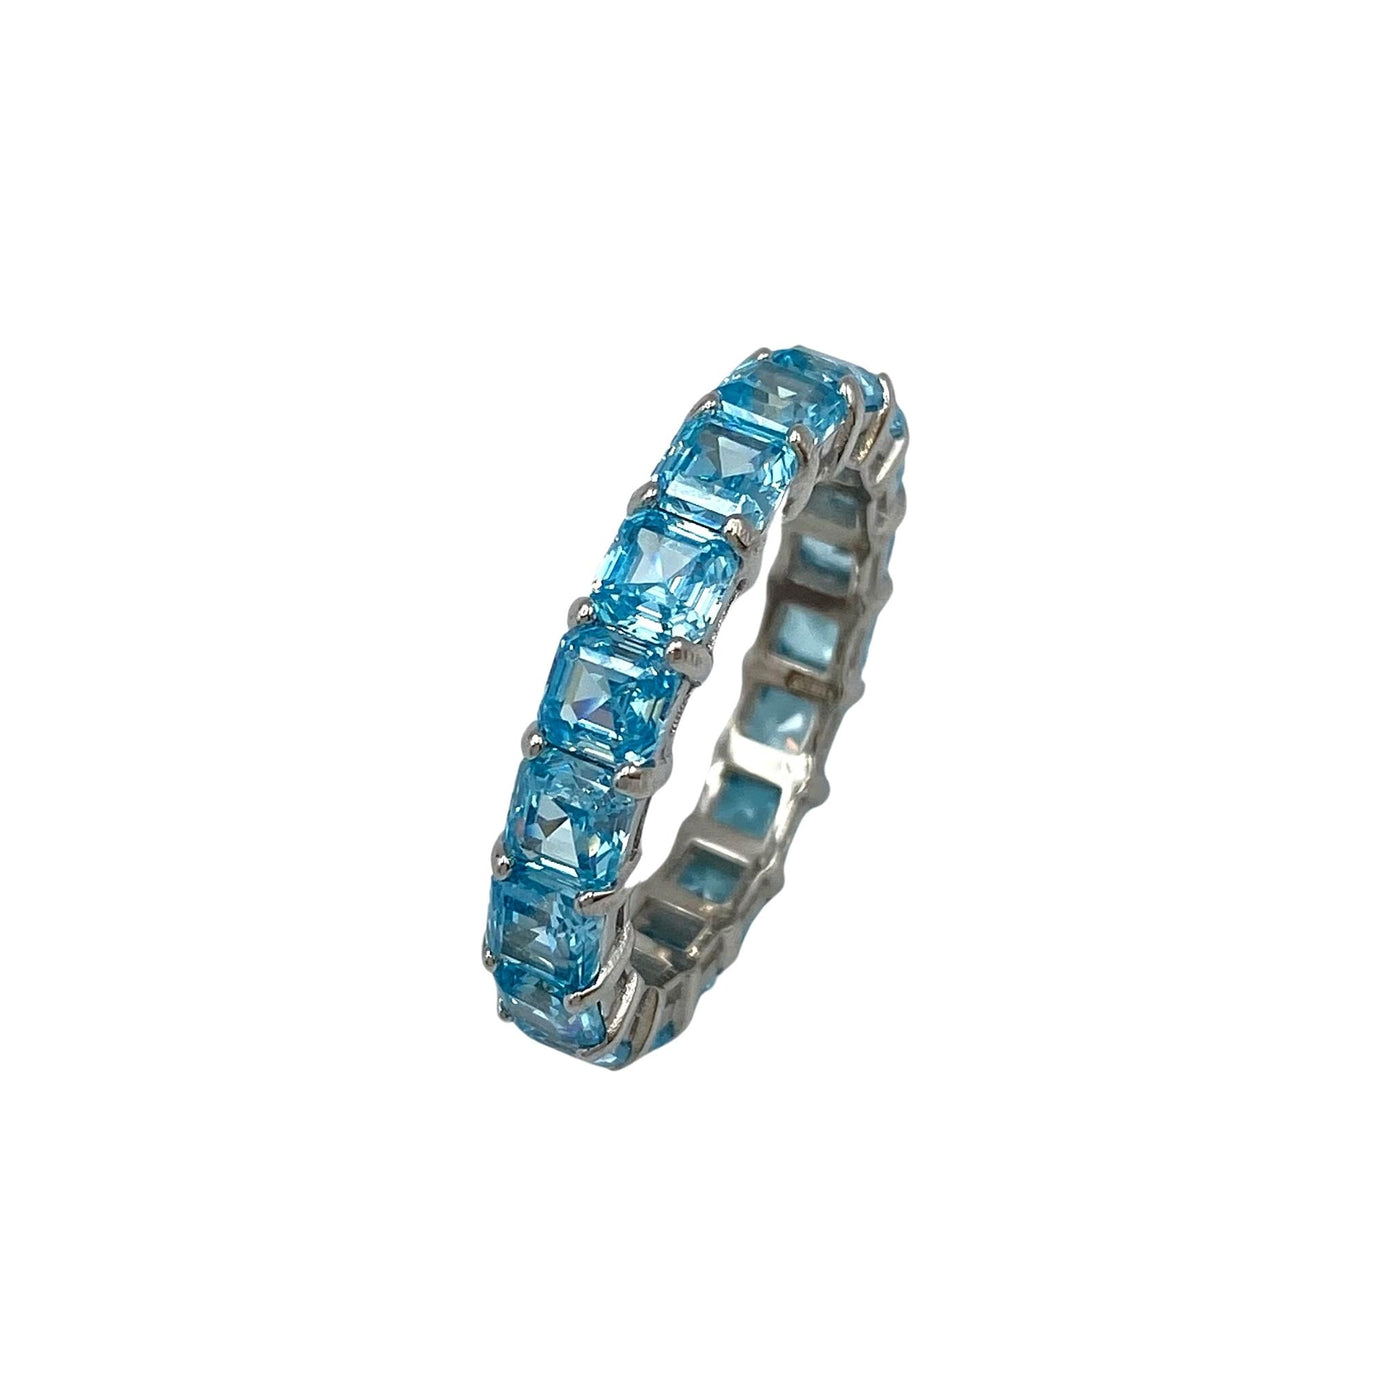 Silver eternity ring with asscher-cut stones